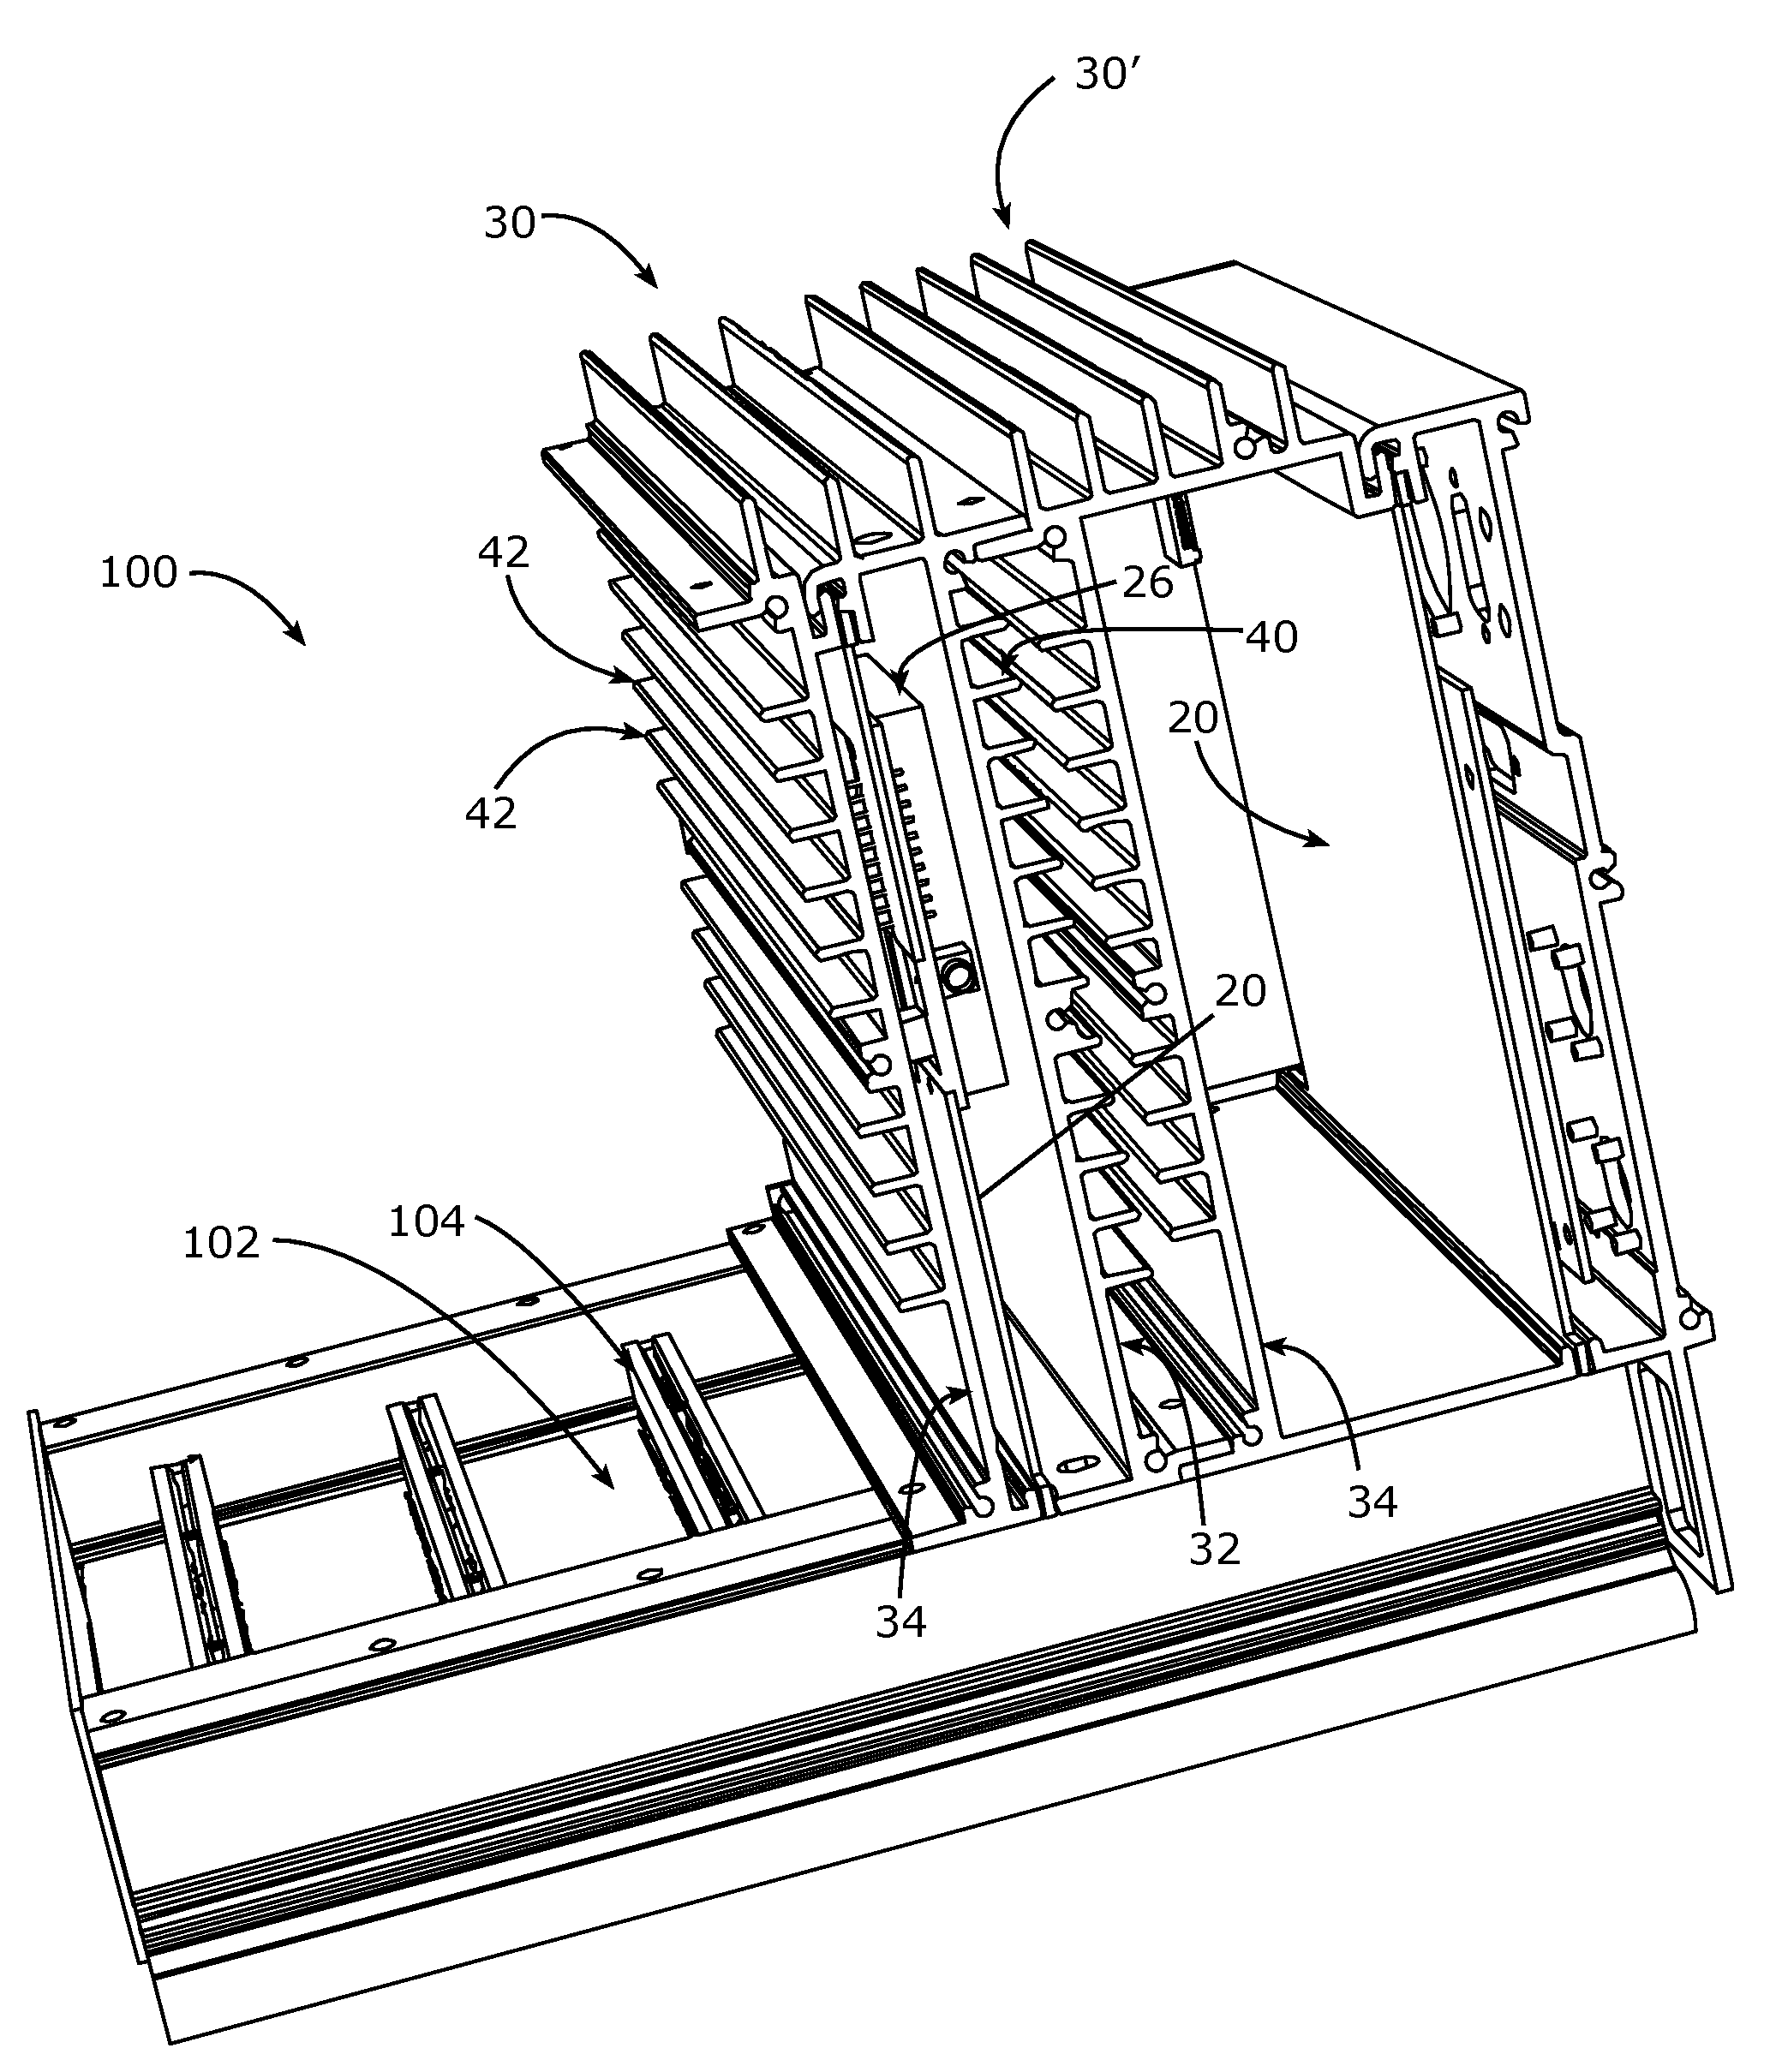 Card level enclosure system having enhanced thermal transfer and improved EMI characteristics